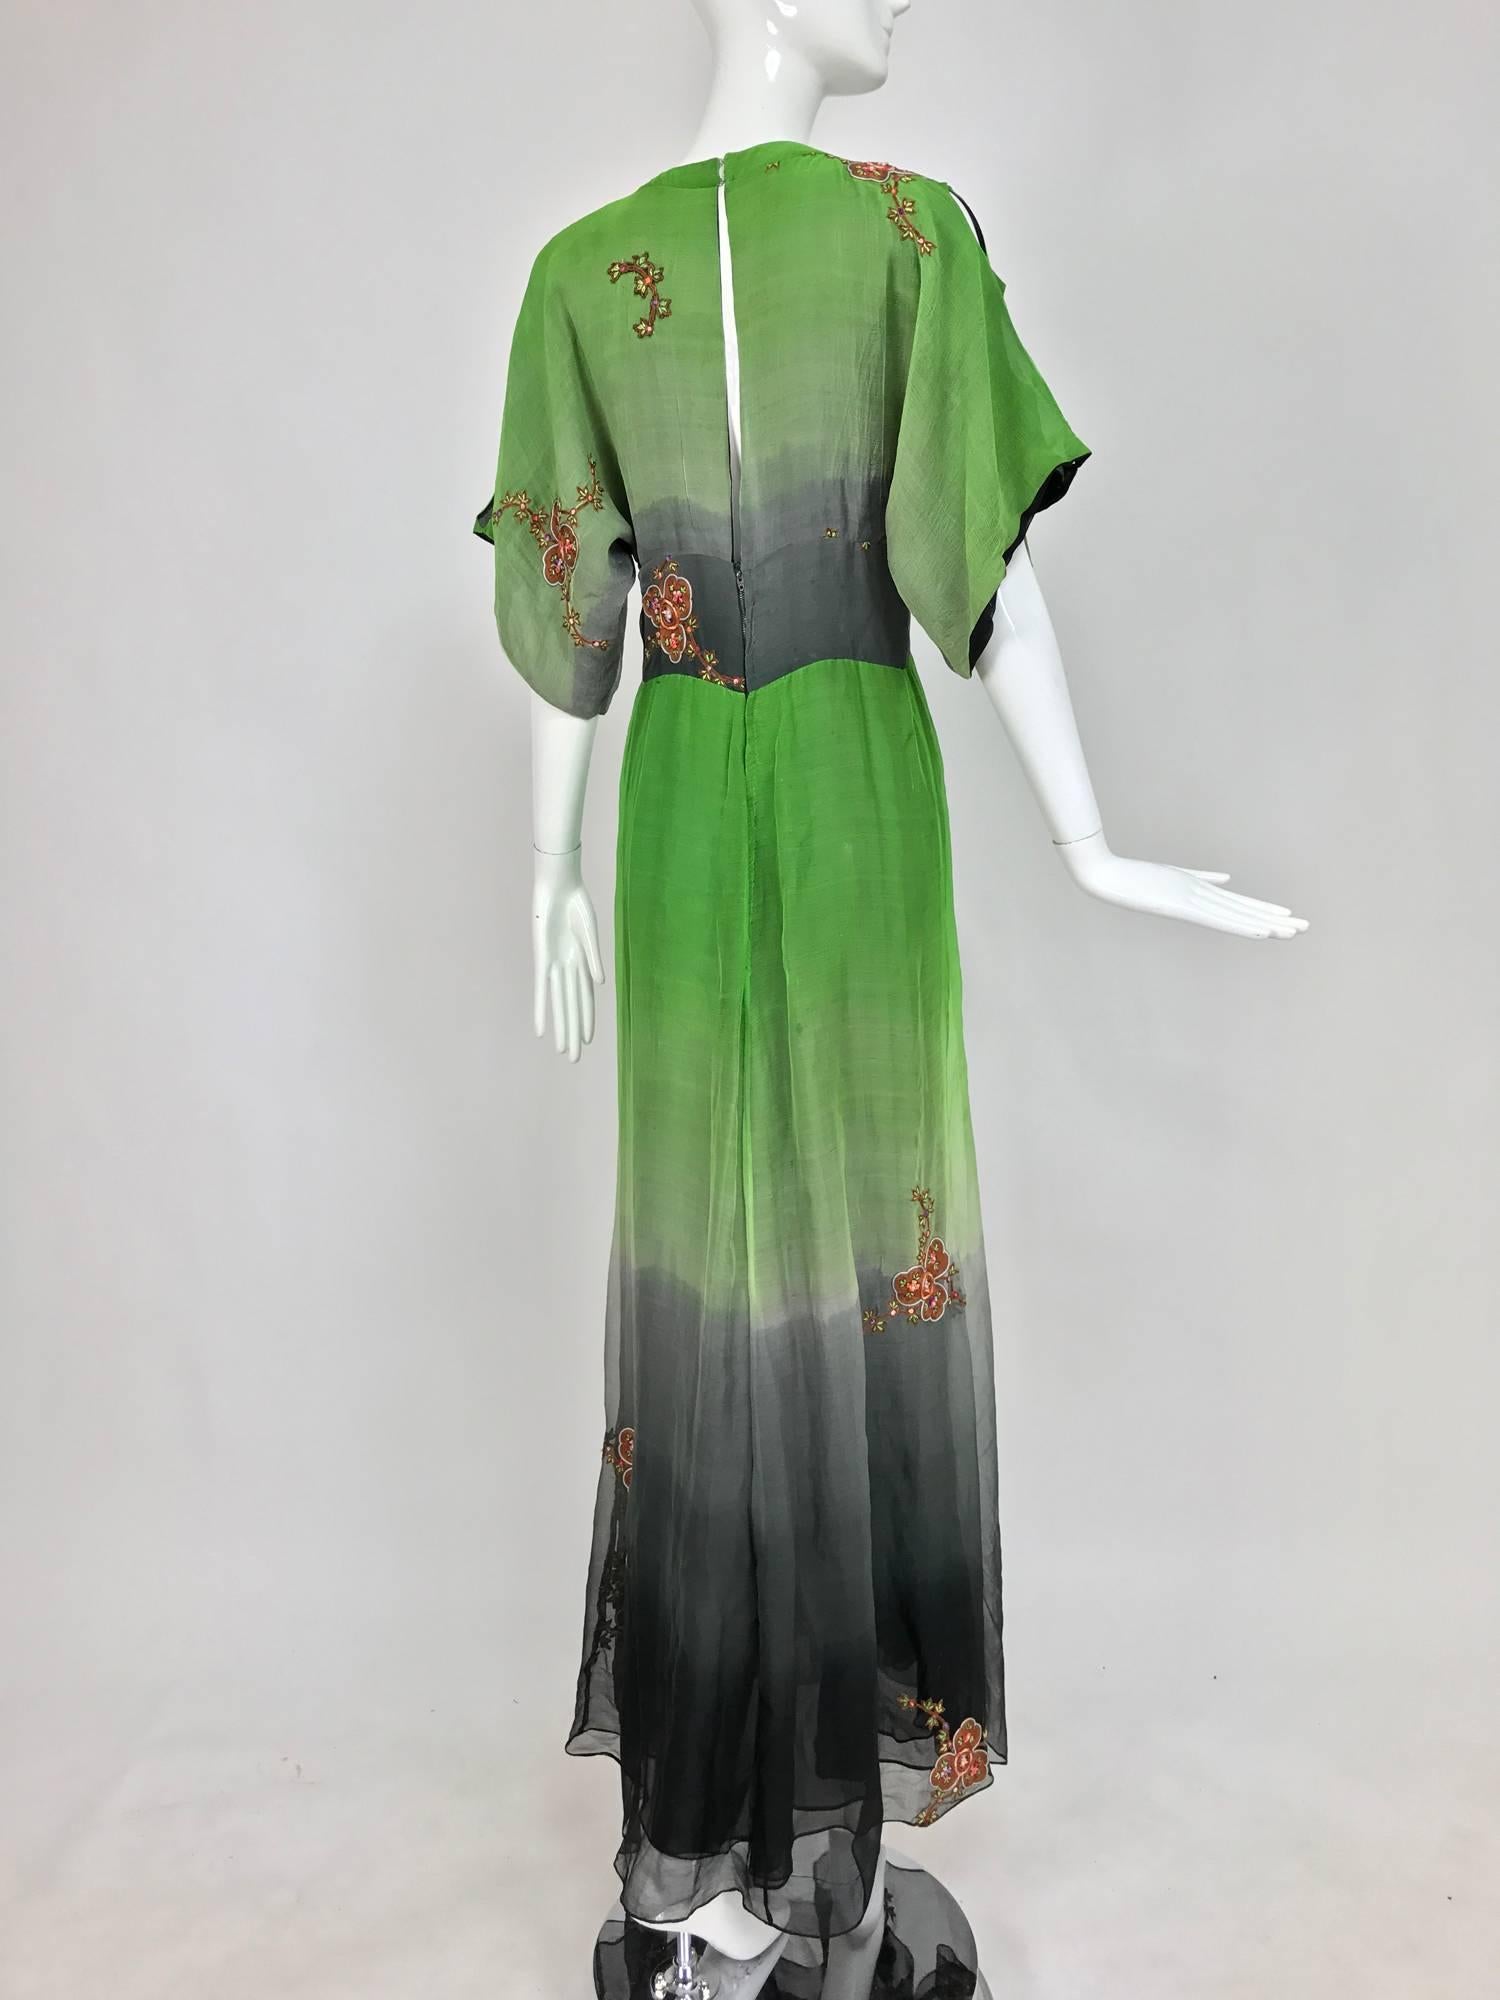 Thea Porter Couture ombred silk chiffon plunge gown with appliques 1970s 1